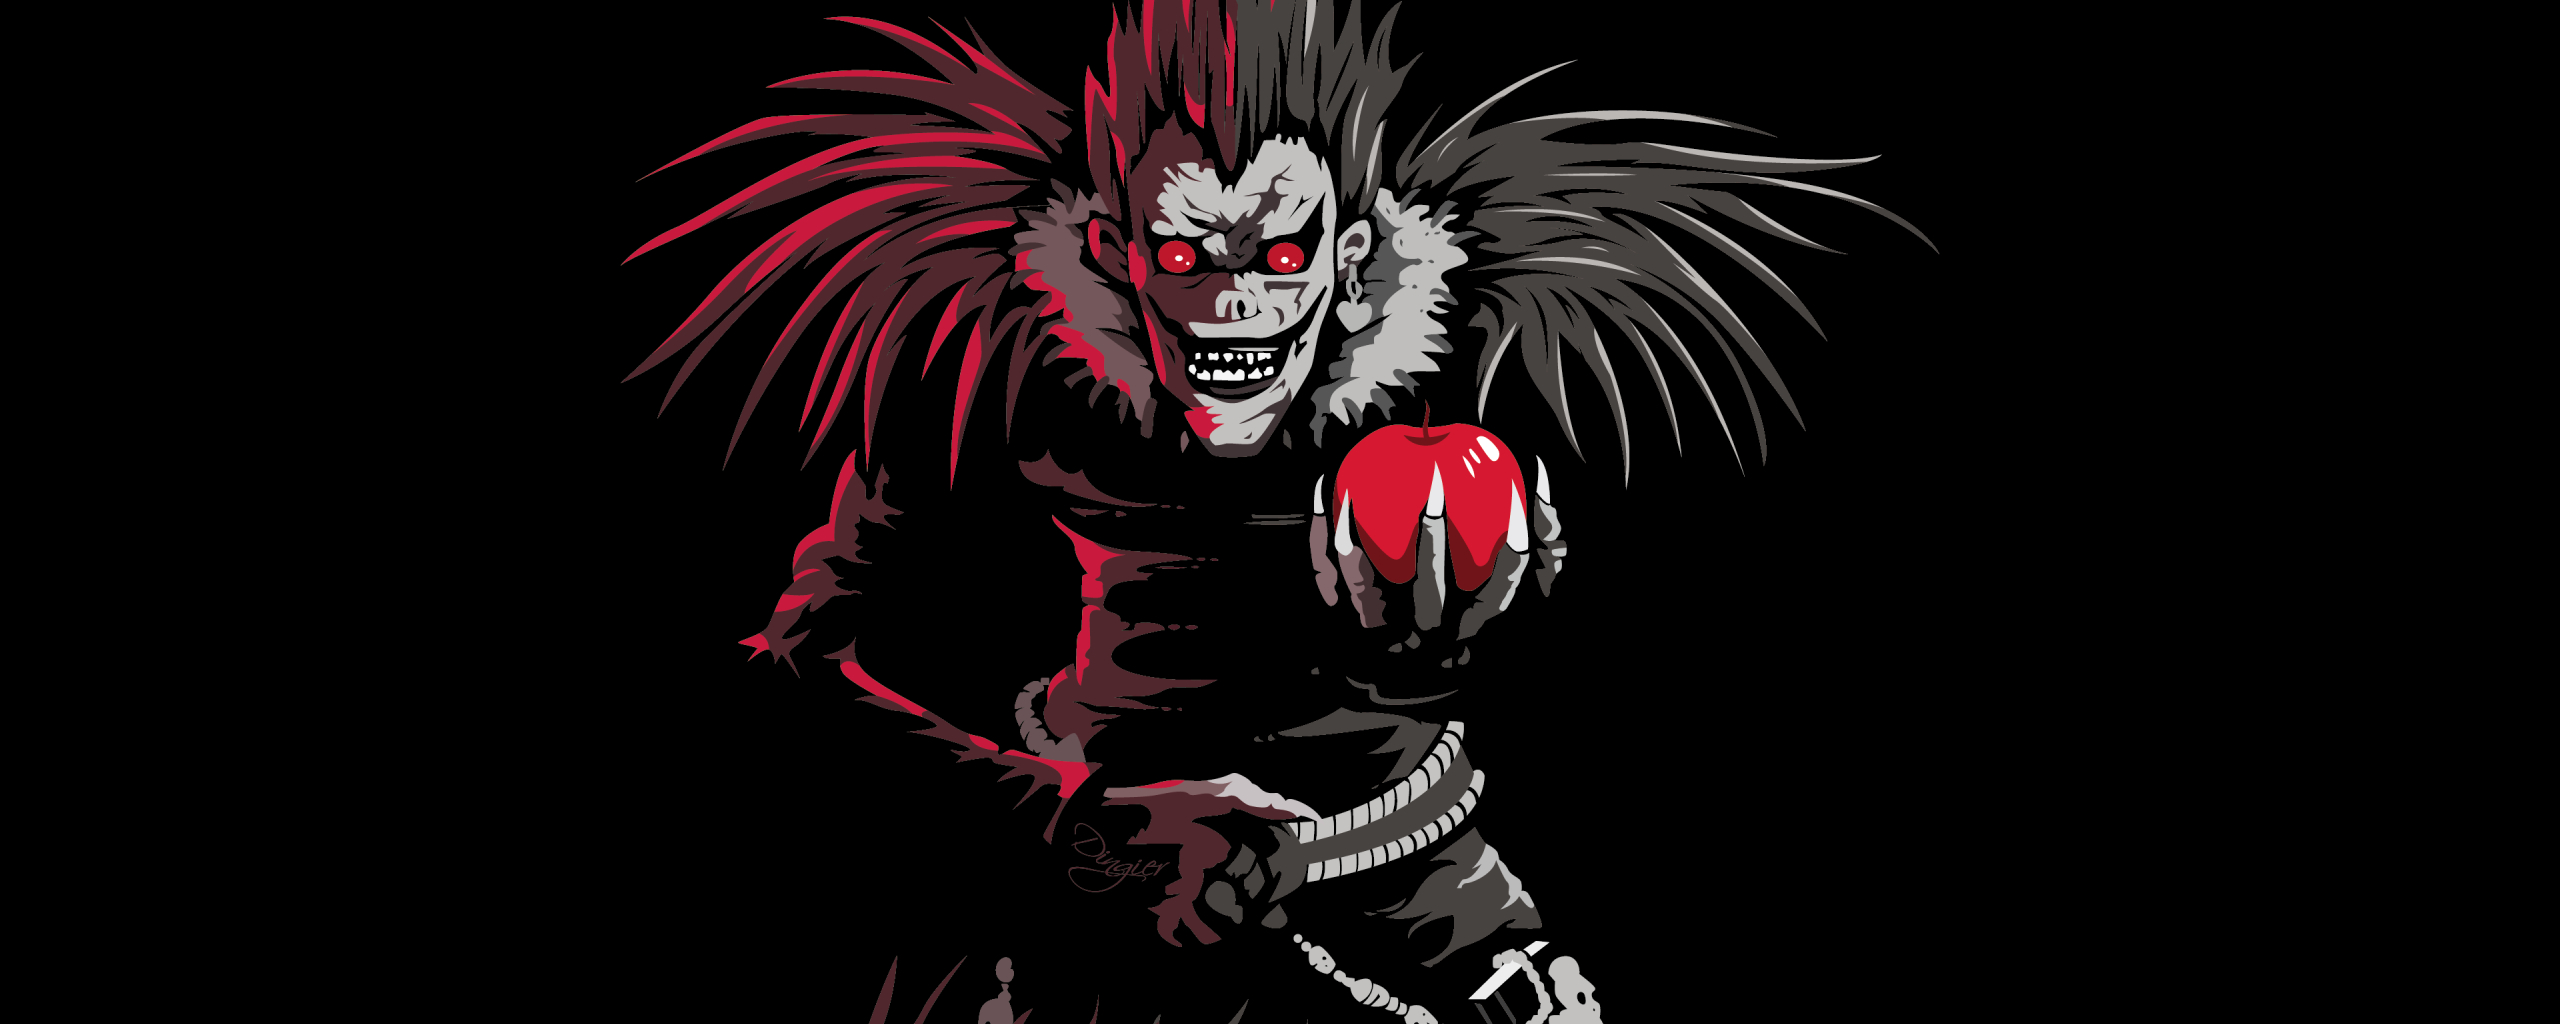 2560x1024 Ryuk In Death Note 2560x1024 Resolution Wallpaper Hd Anime 4k Wallpapers Images Photos And Background